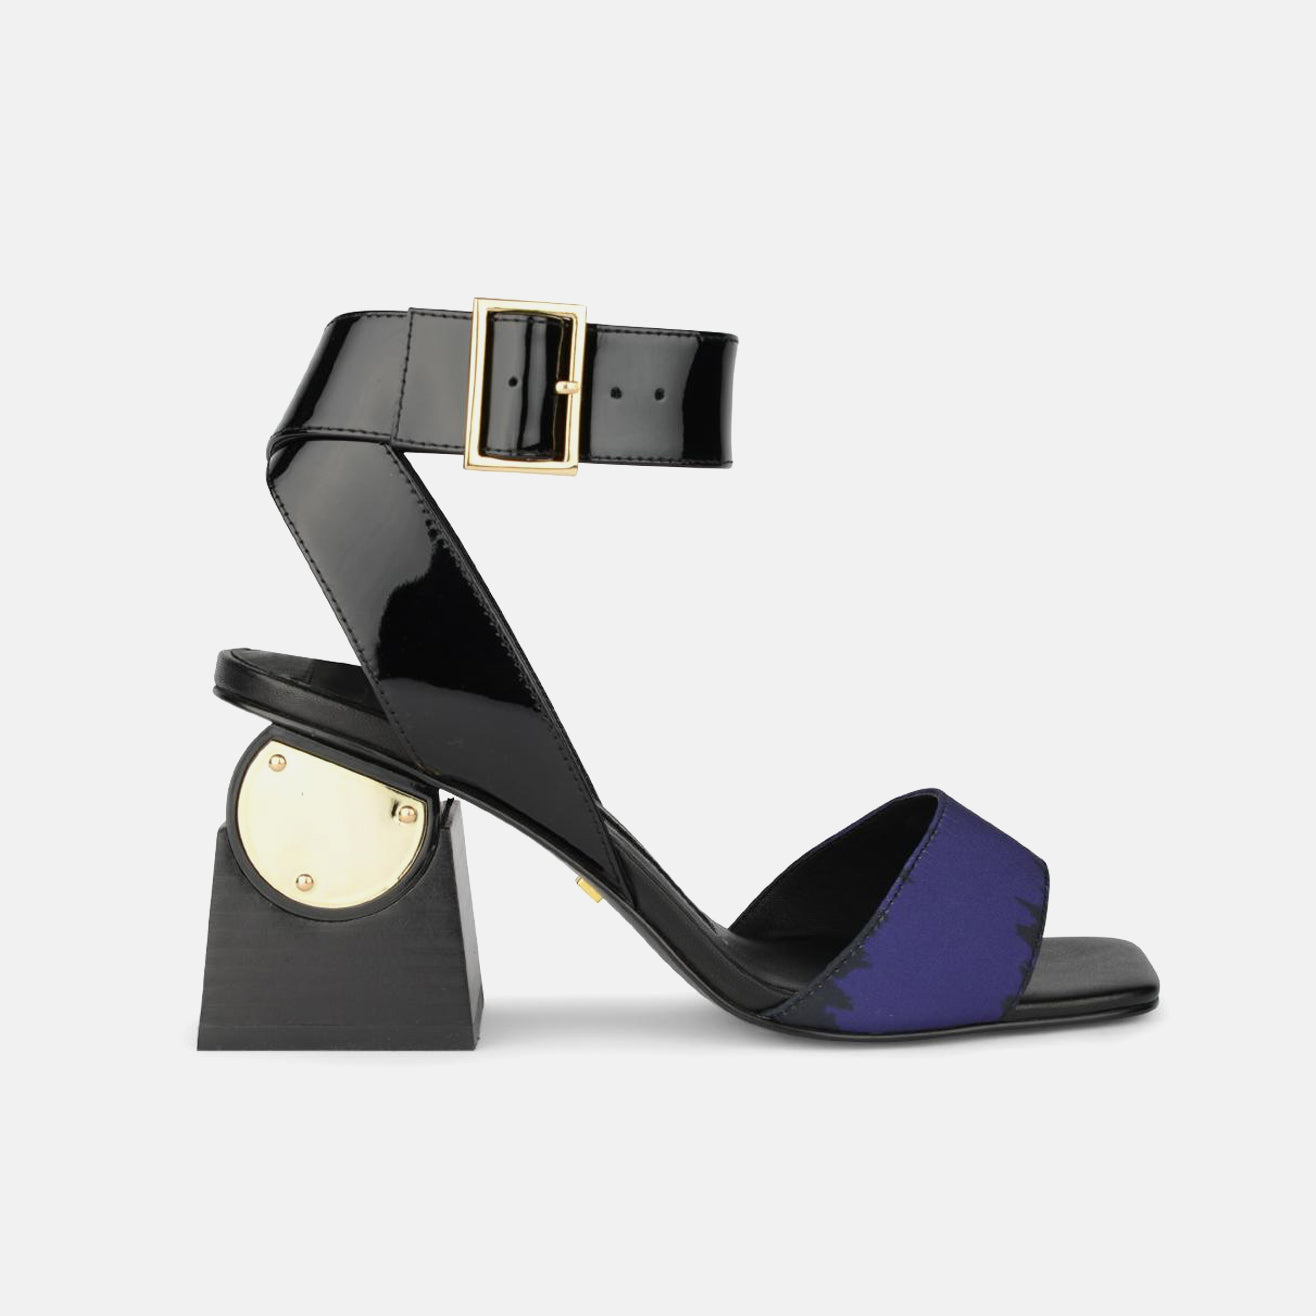 Outer side view of the kat maconie nyla sandal. This sandal has a black patent leather upper near the heel and a black patent leather ankle strap with a buckle. The upper near the square toe is blue and varnished. The heel is black with a gold circle.